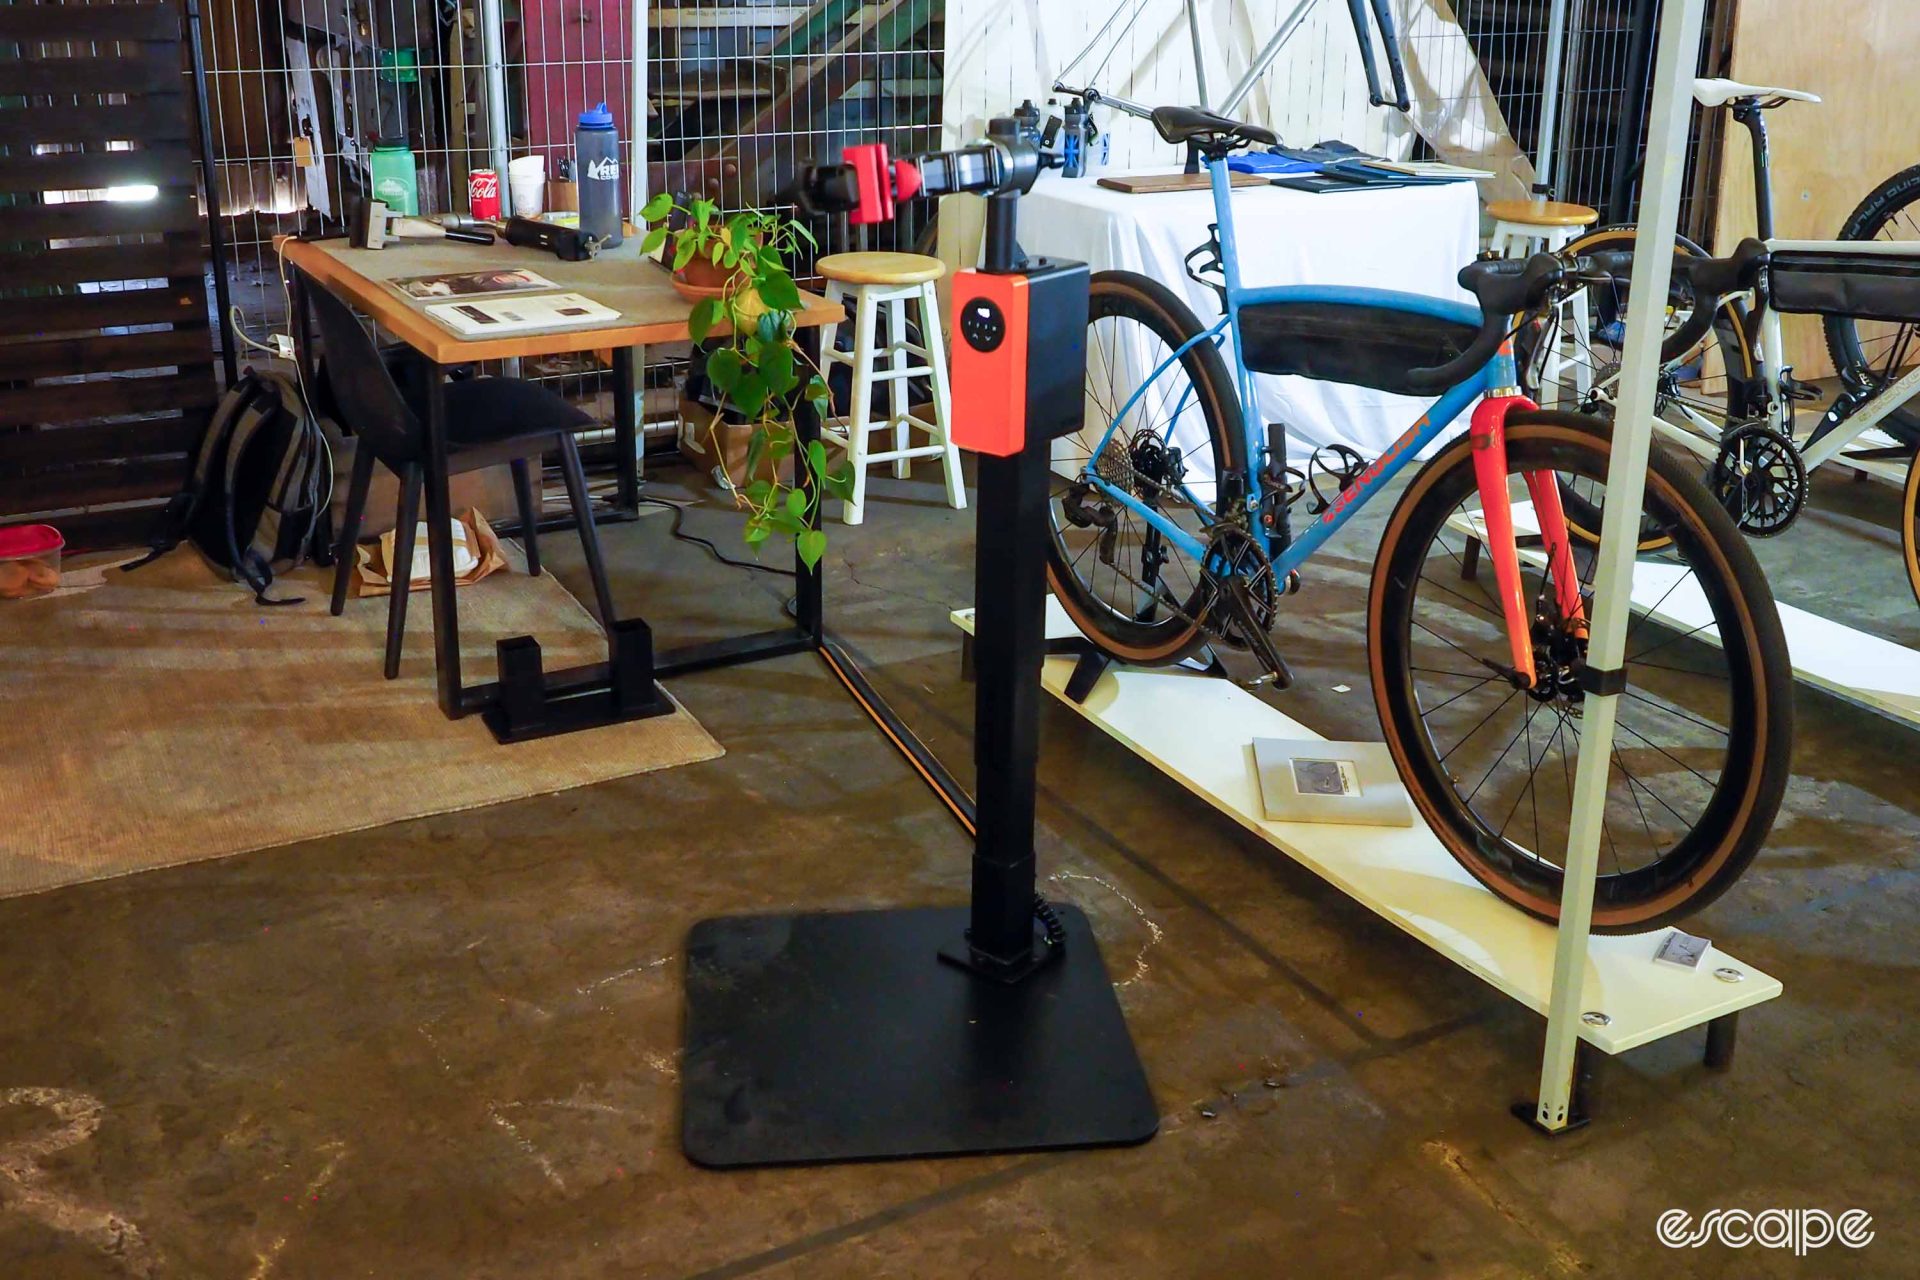 Remco Tool Bike Lift electronically height-adjustable bicycle repair stand.